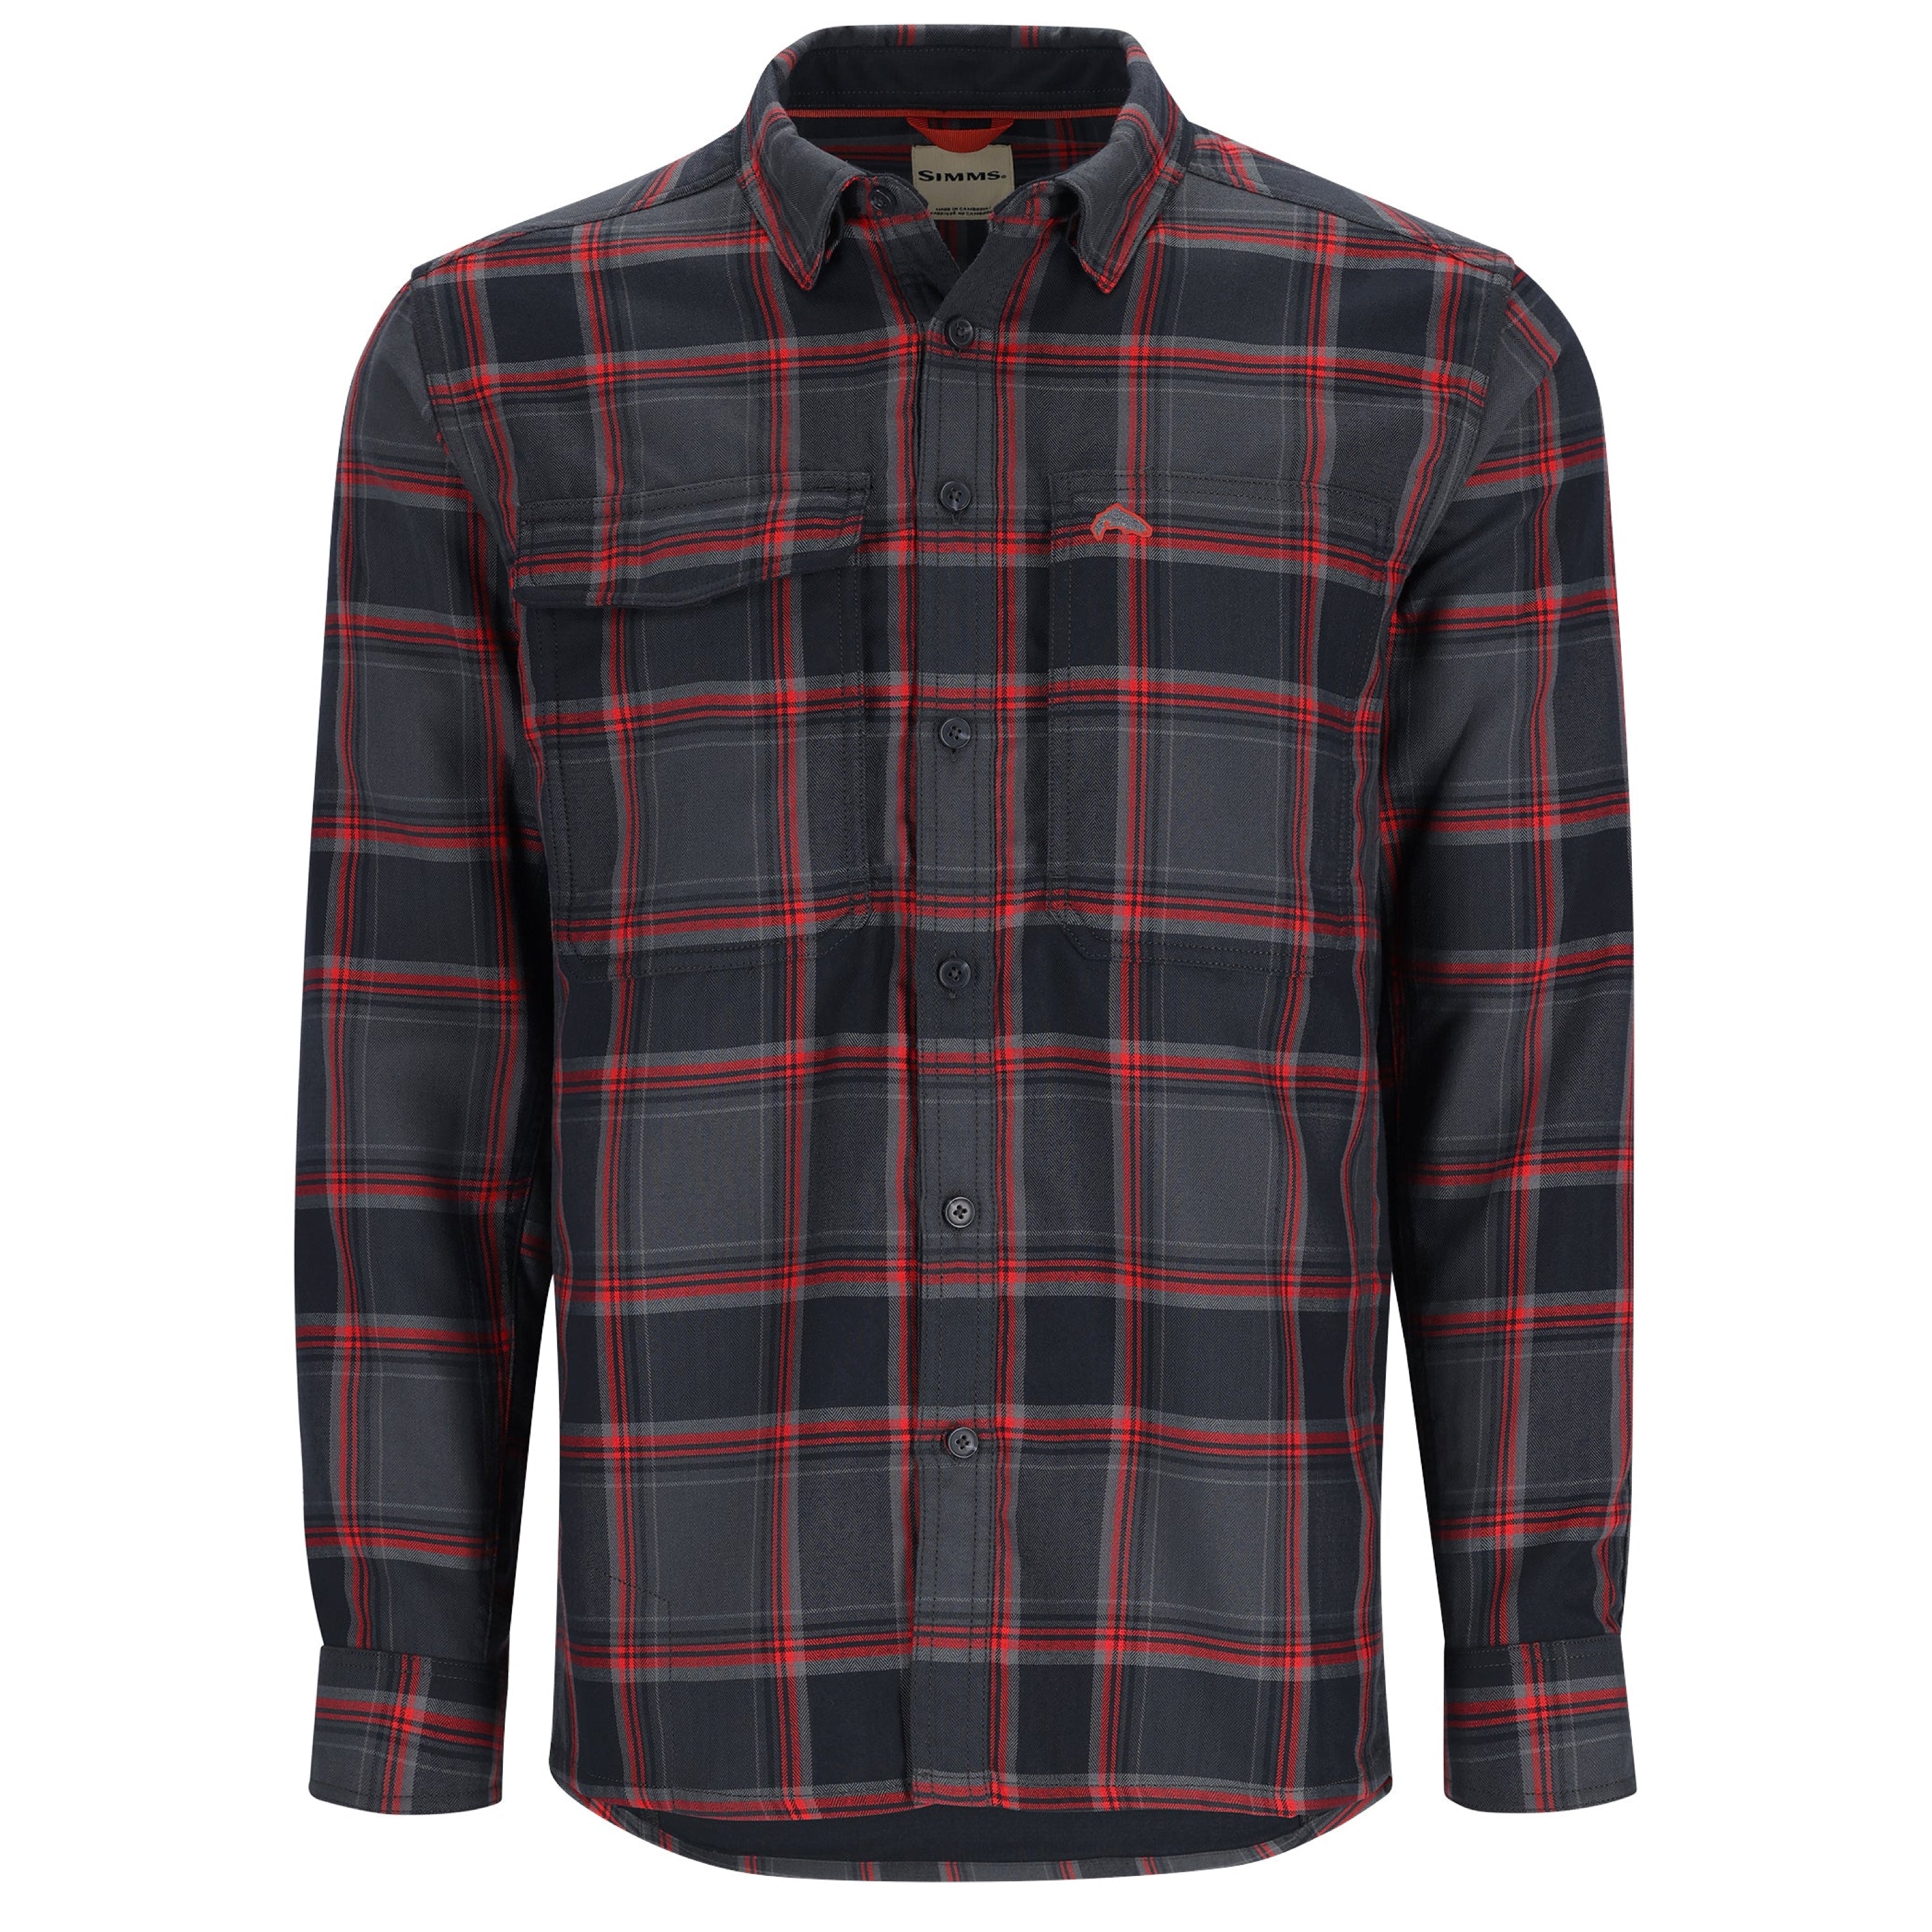 Simms Coldweather Shirt M / Hickory Asym Ombre Plaid